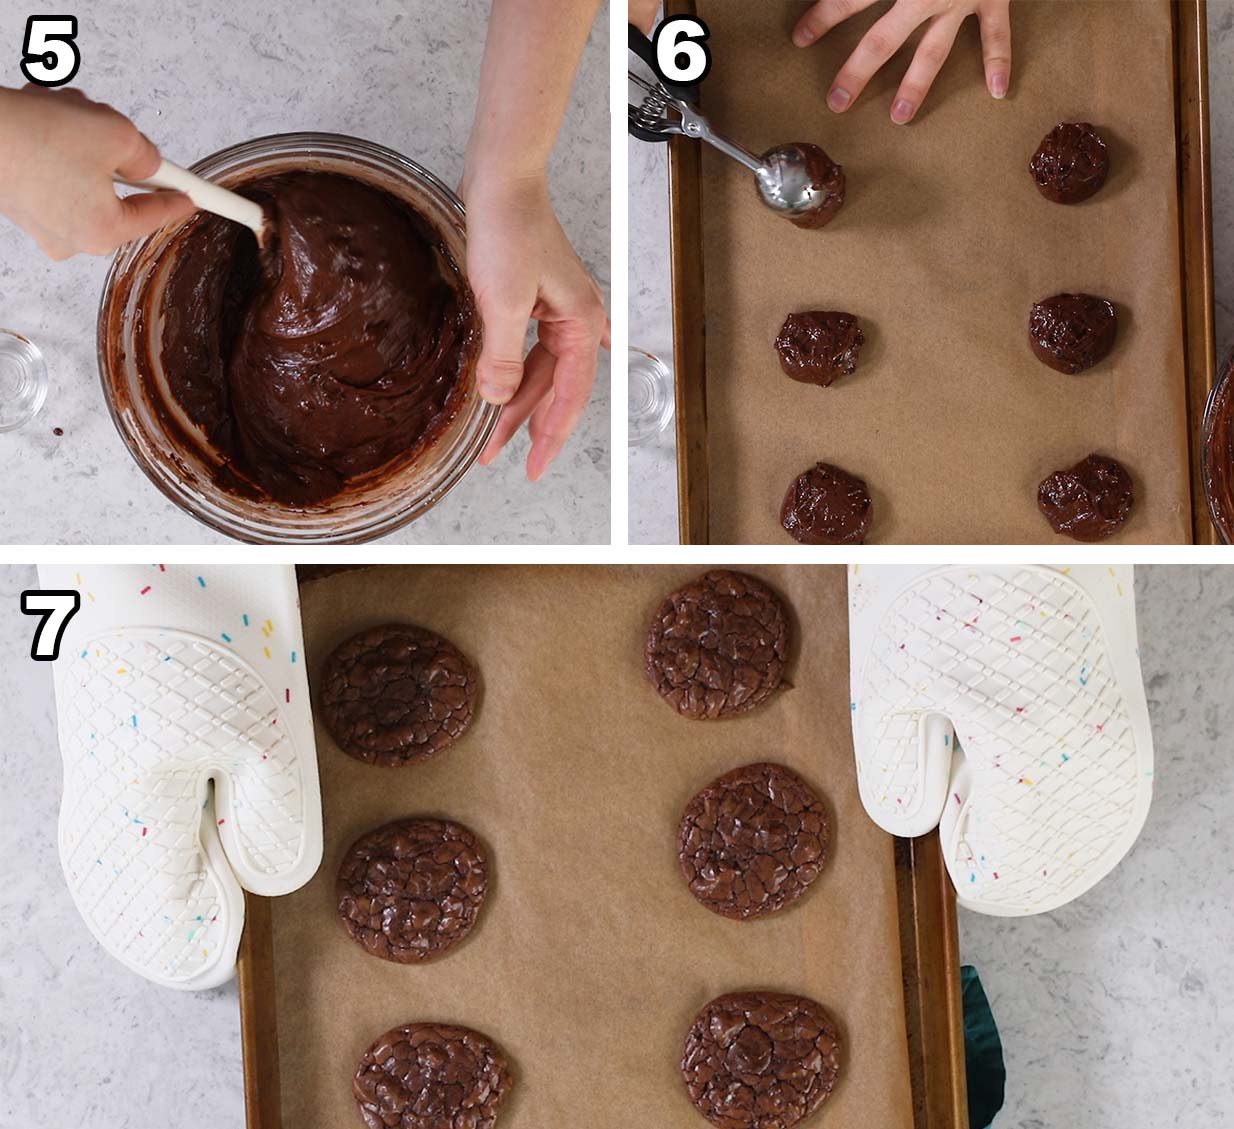 Collage of three photos showing chocolate cookie dough being scooped and baked.